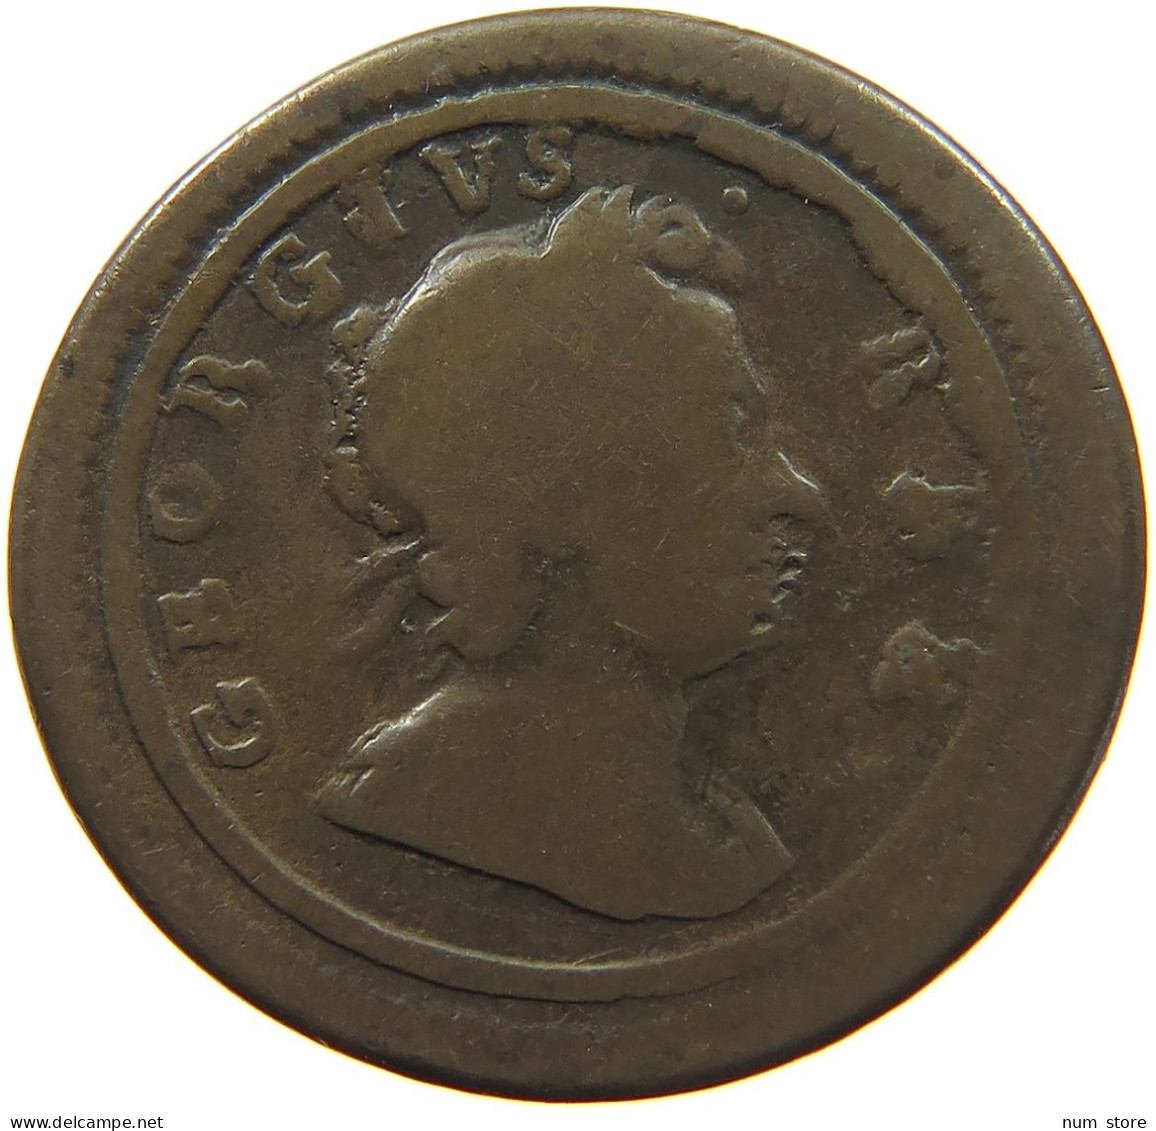 GREAT BRITAIN FARTHING 1720 George I. (1714-1727) #s020 0261 - A. 1 Farthing